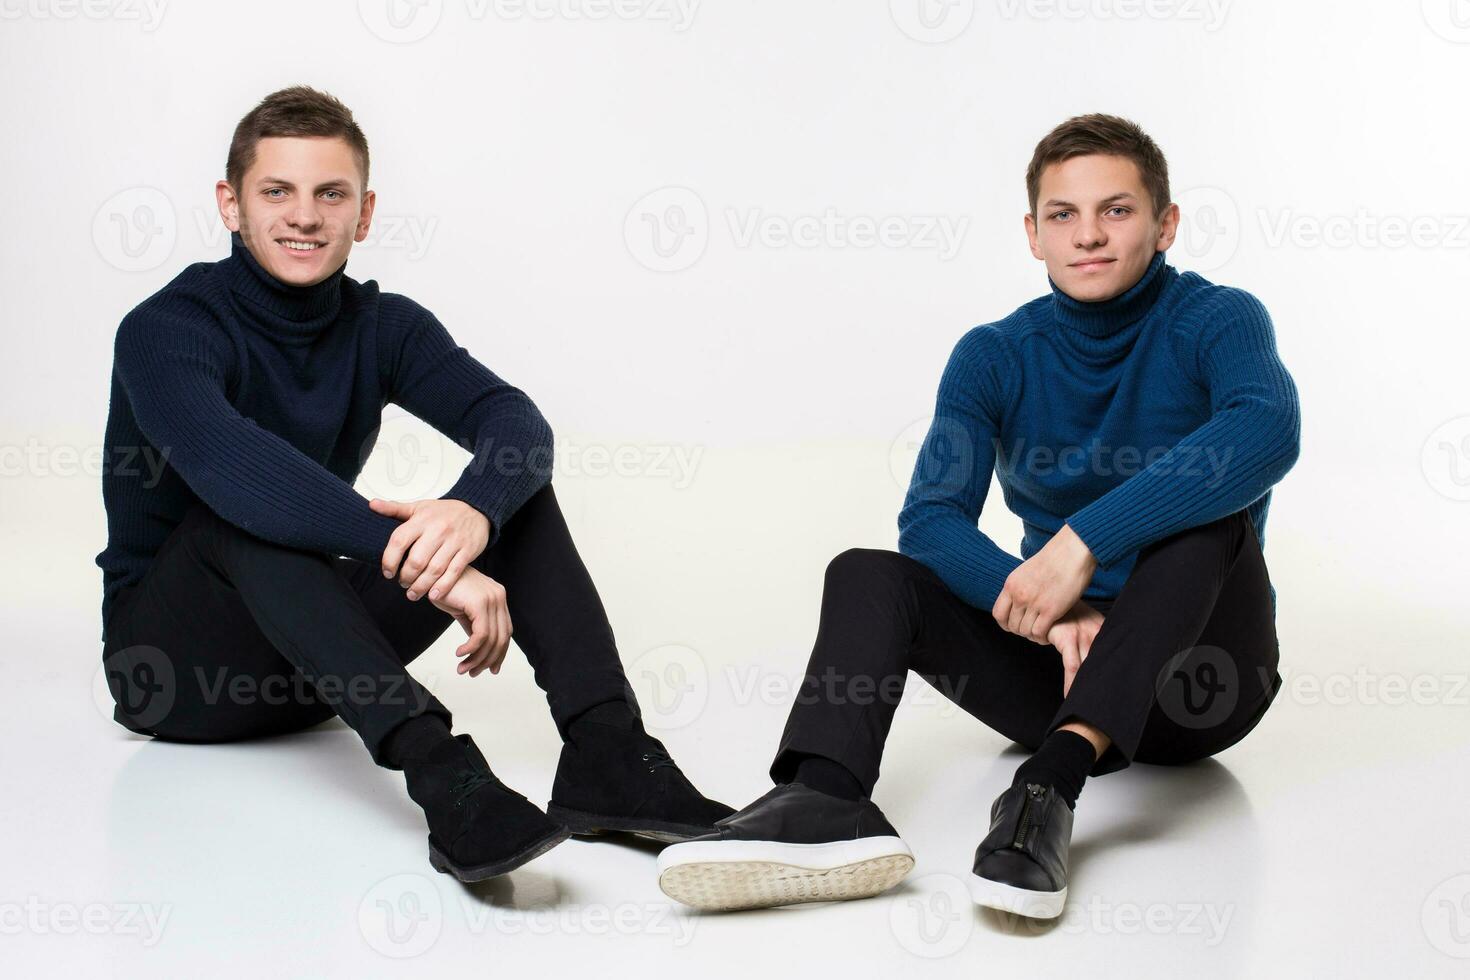 Casual twin brothers. Studio shoton a white background photo